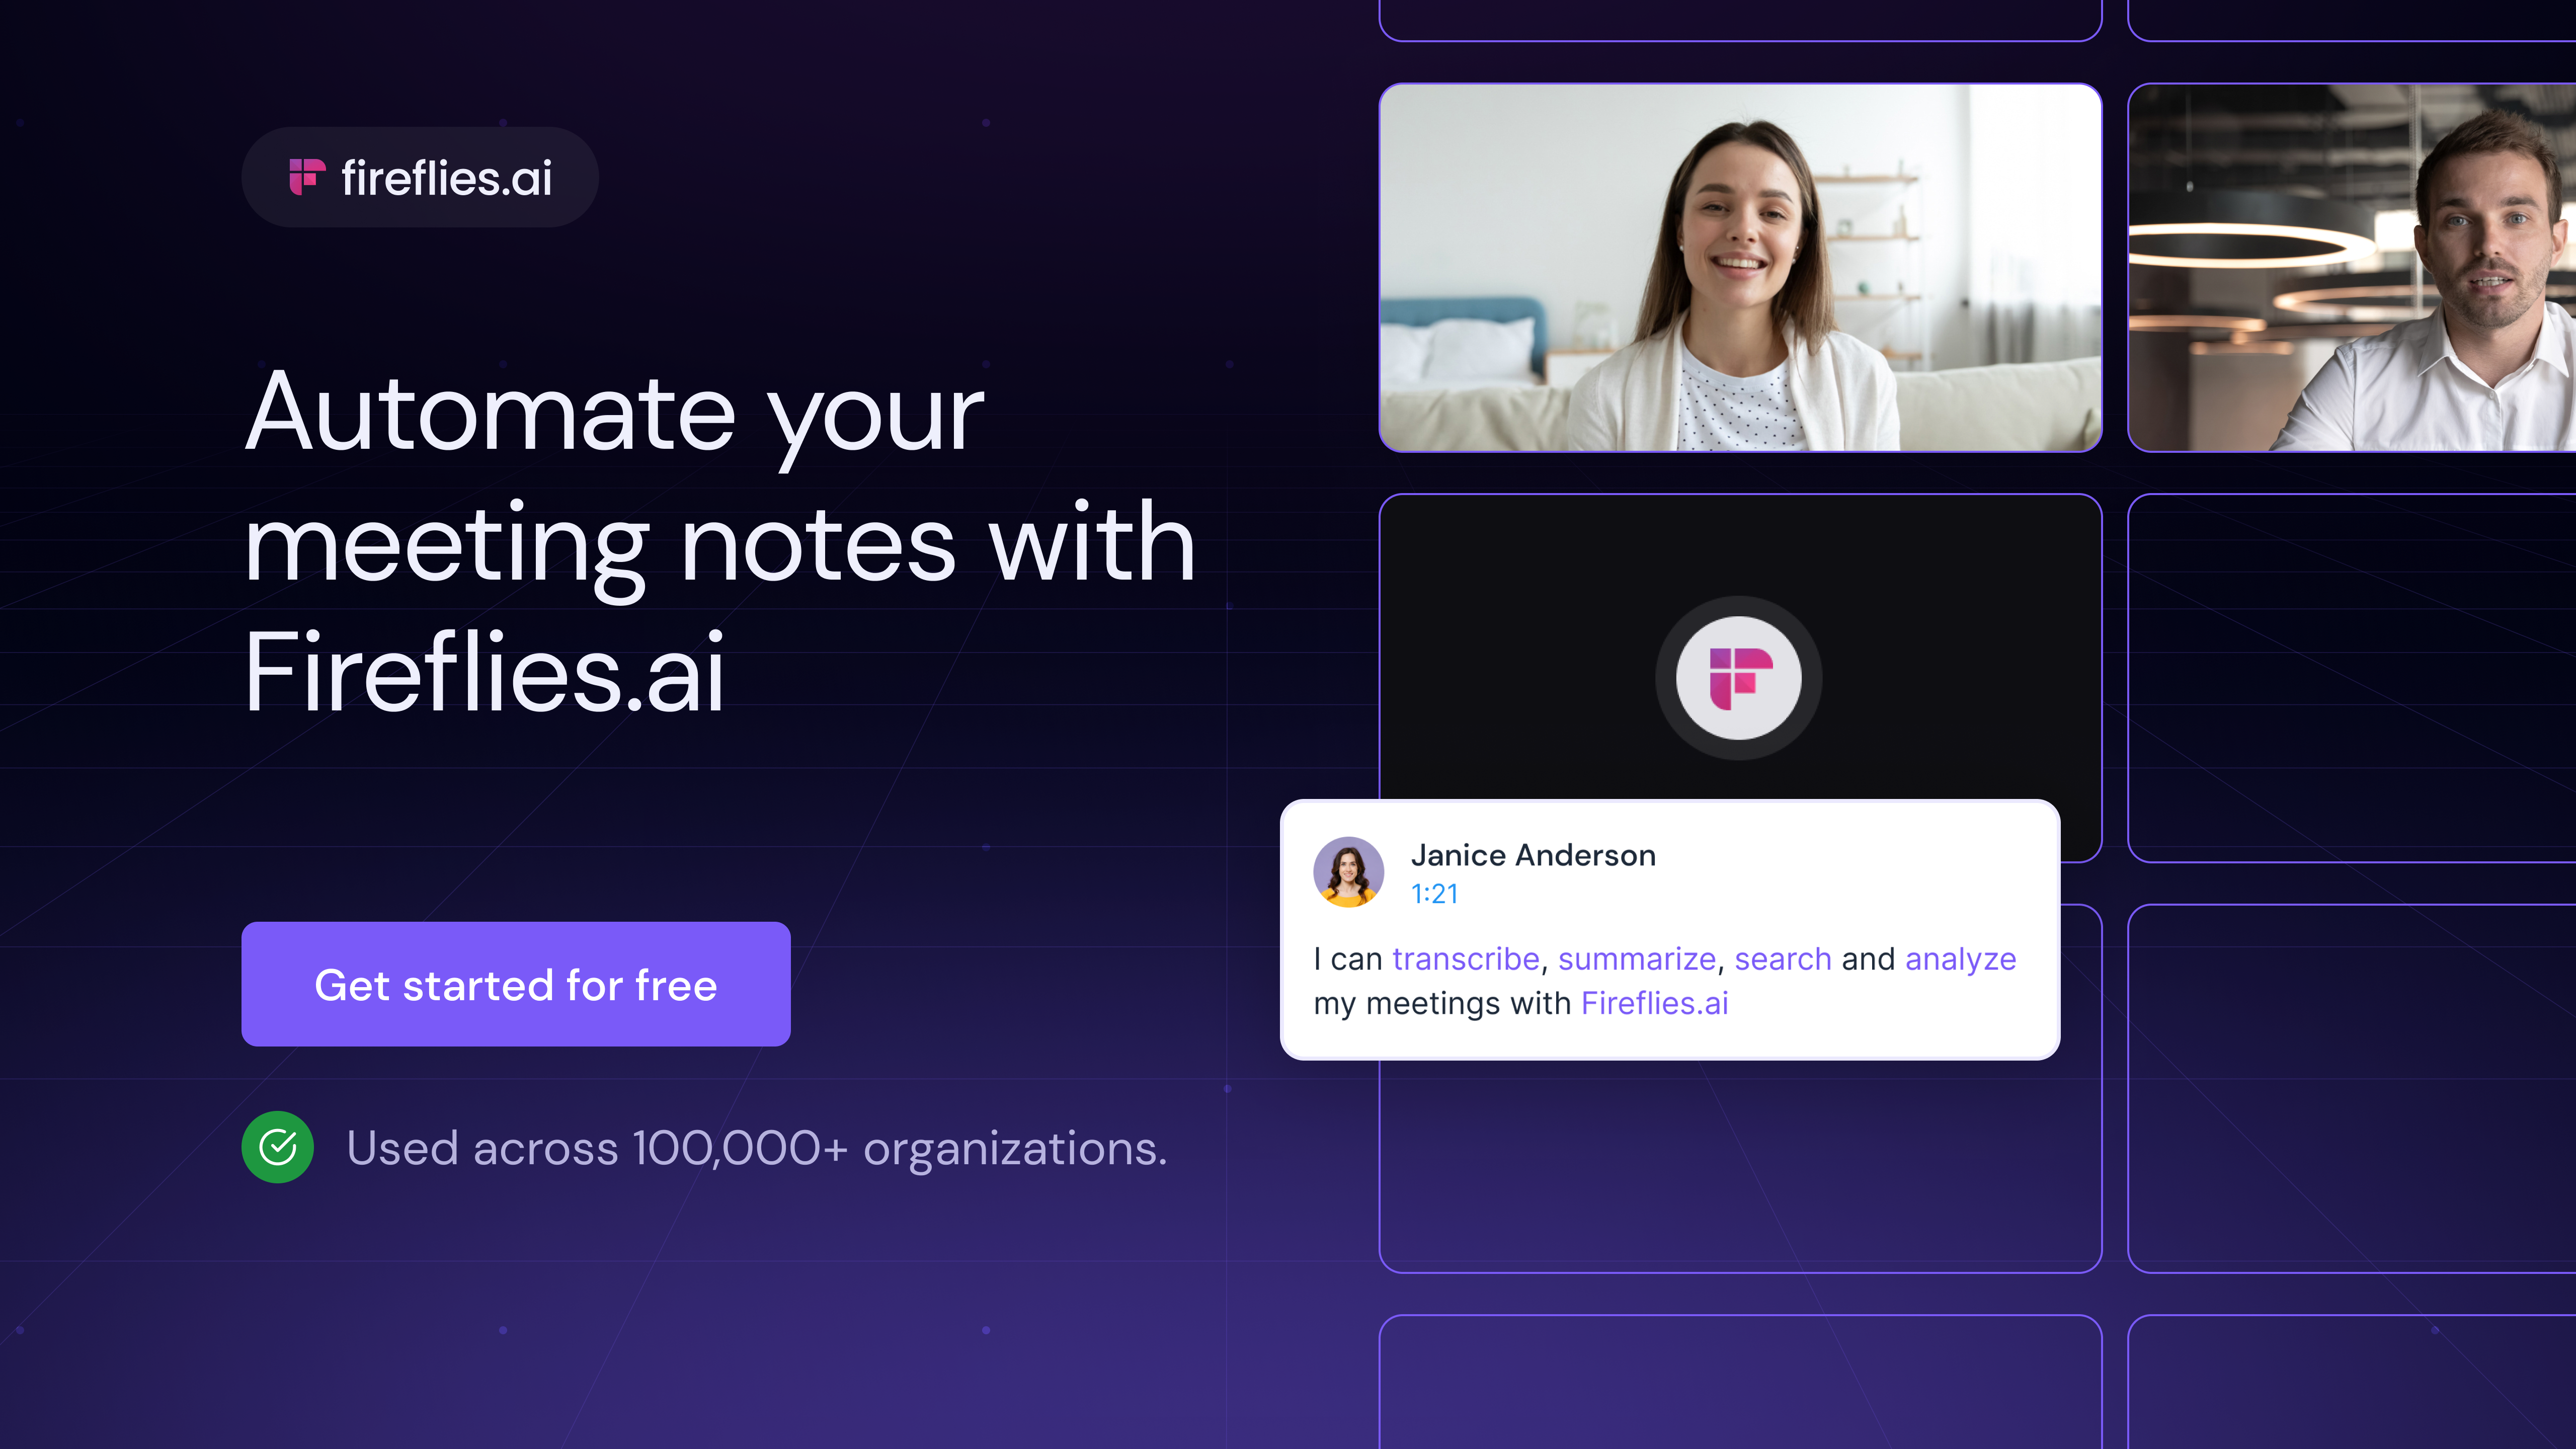 Automate your meeting notes with Fireflies.ai